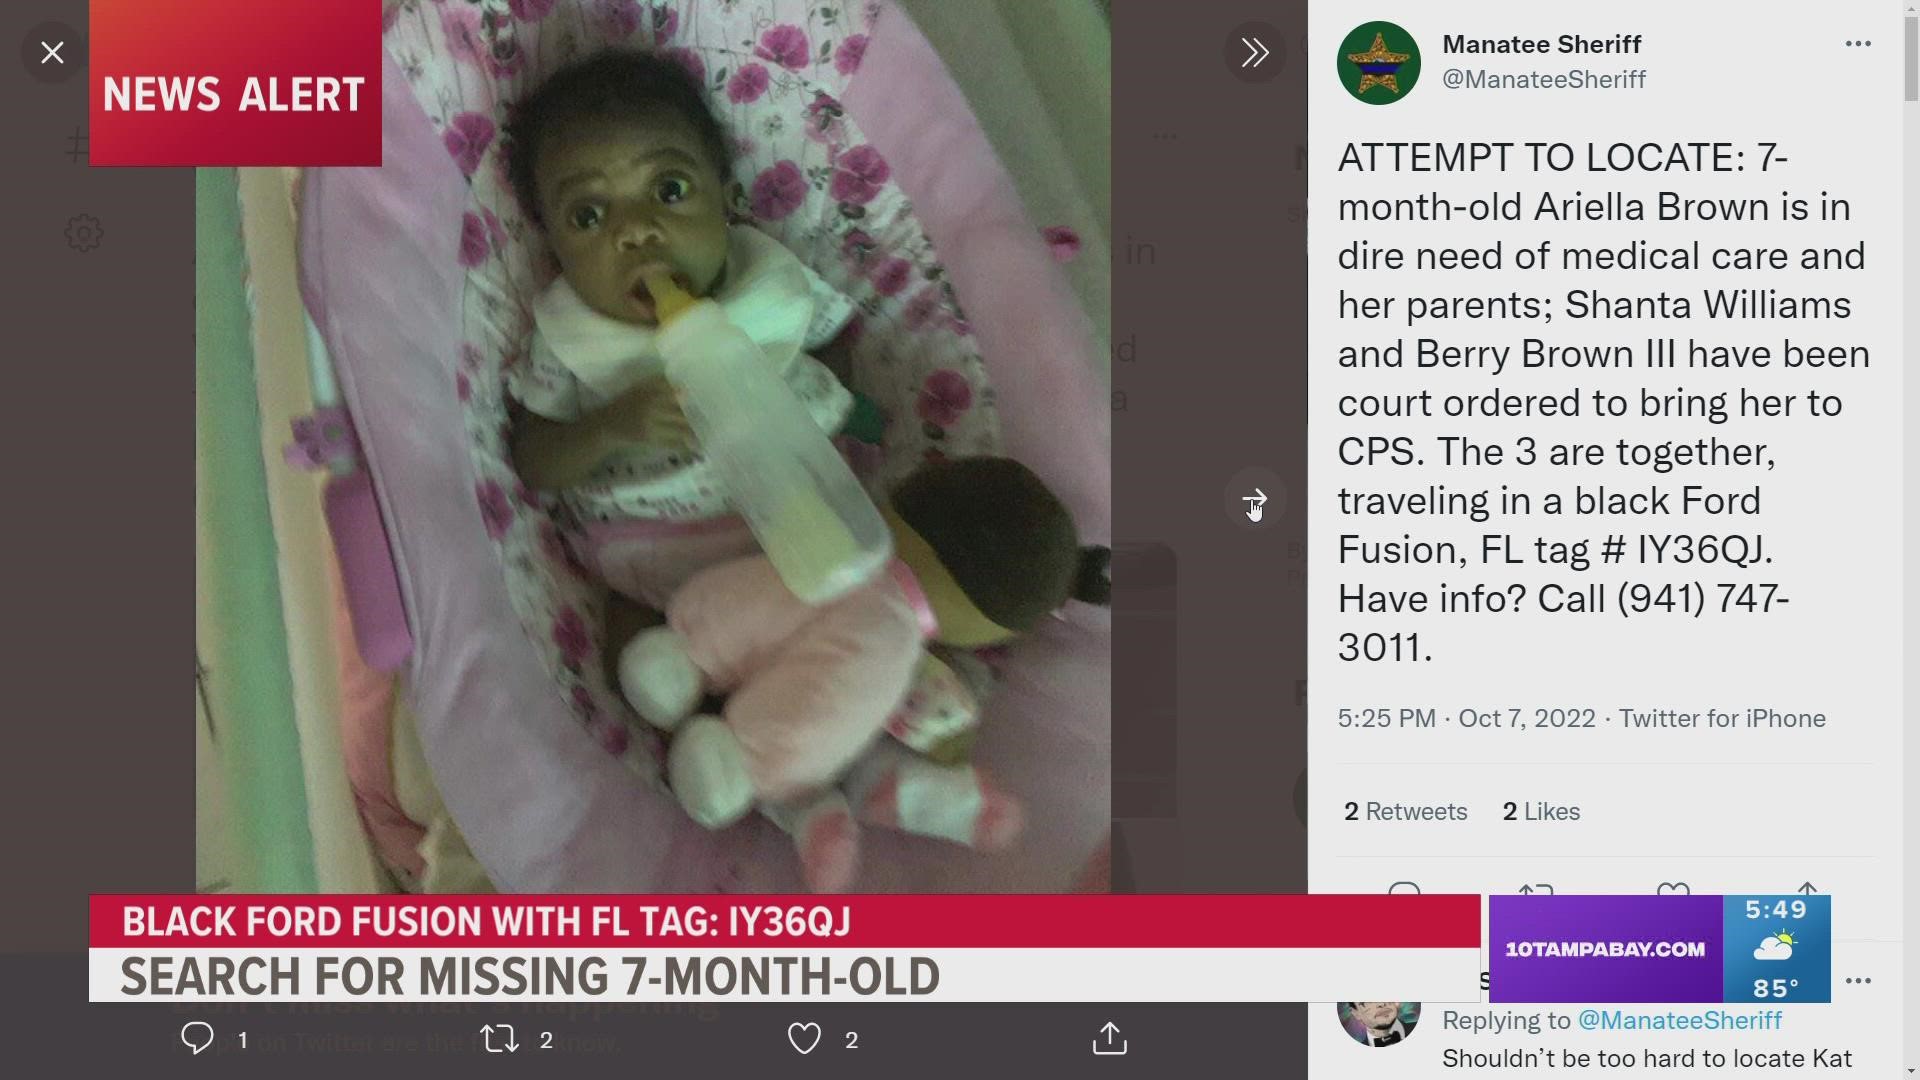 The baby is reportedly in the company of her mother and father possibly traveling between Manatee, Sarasota and Orange counties.